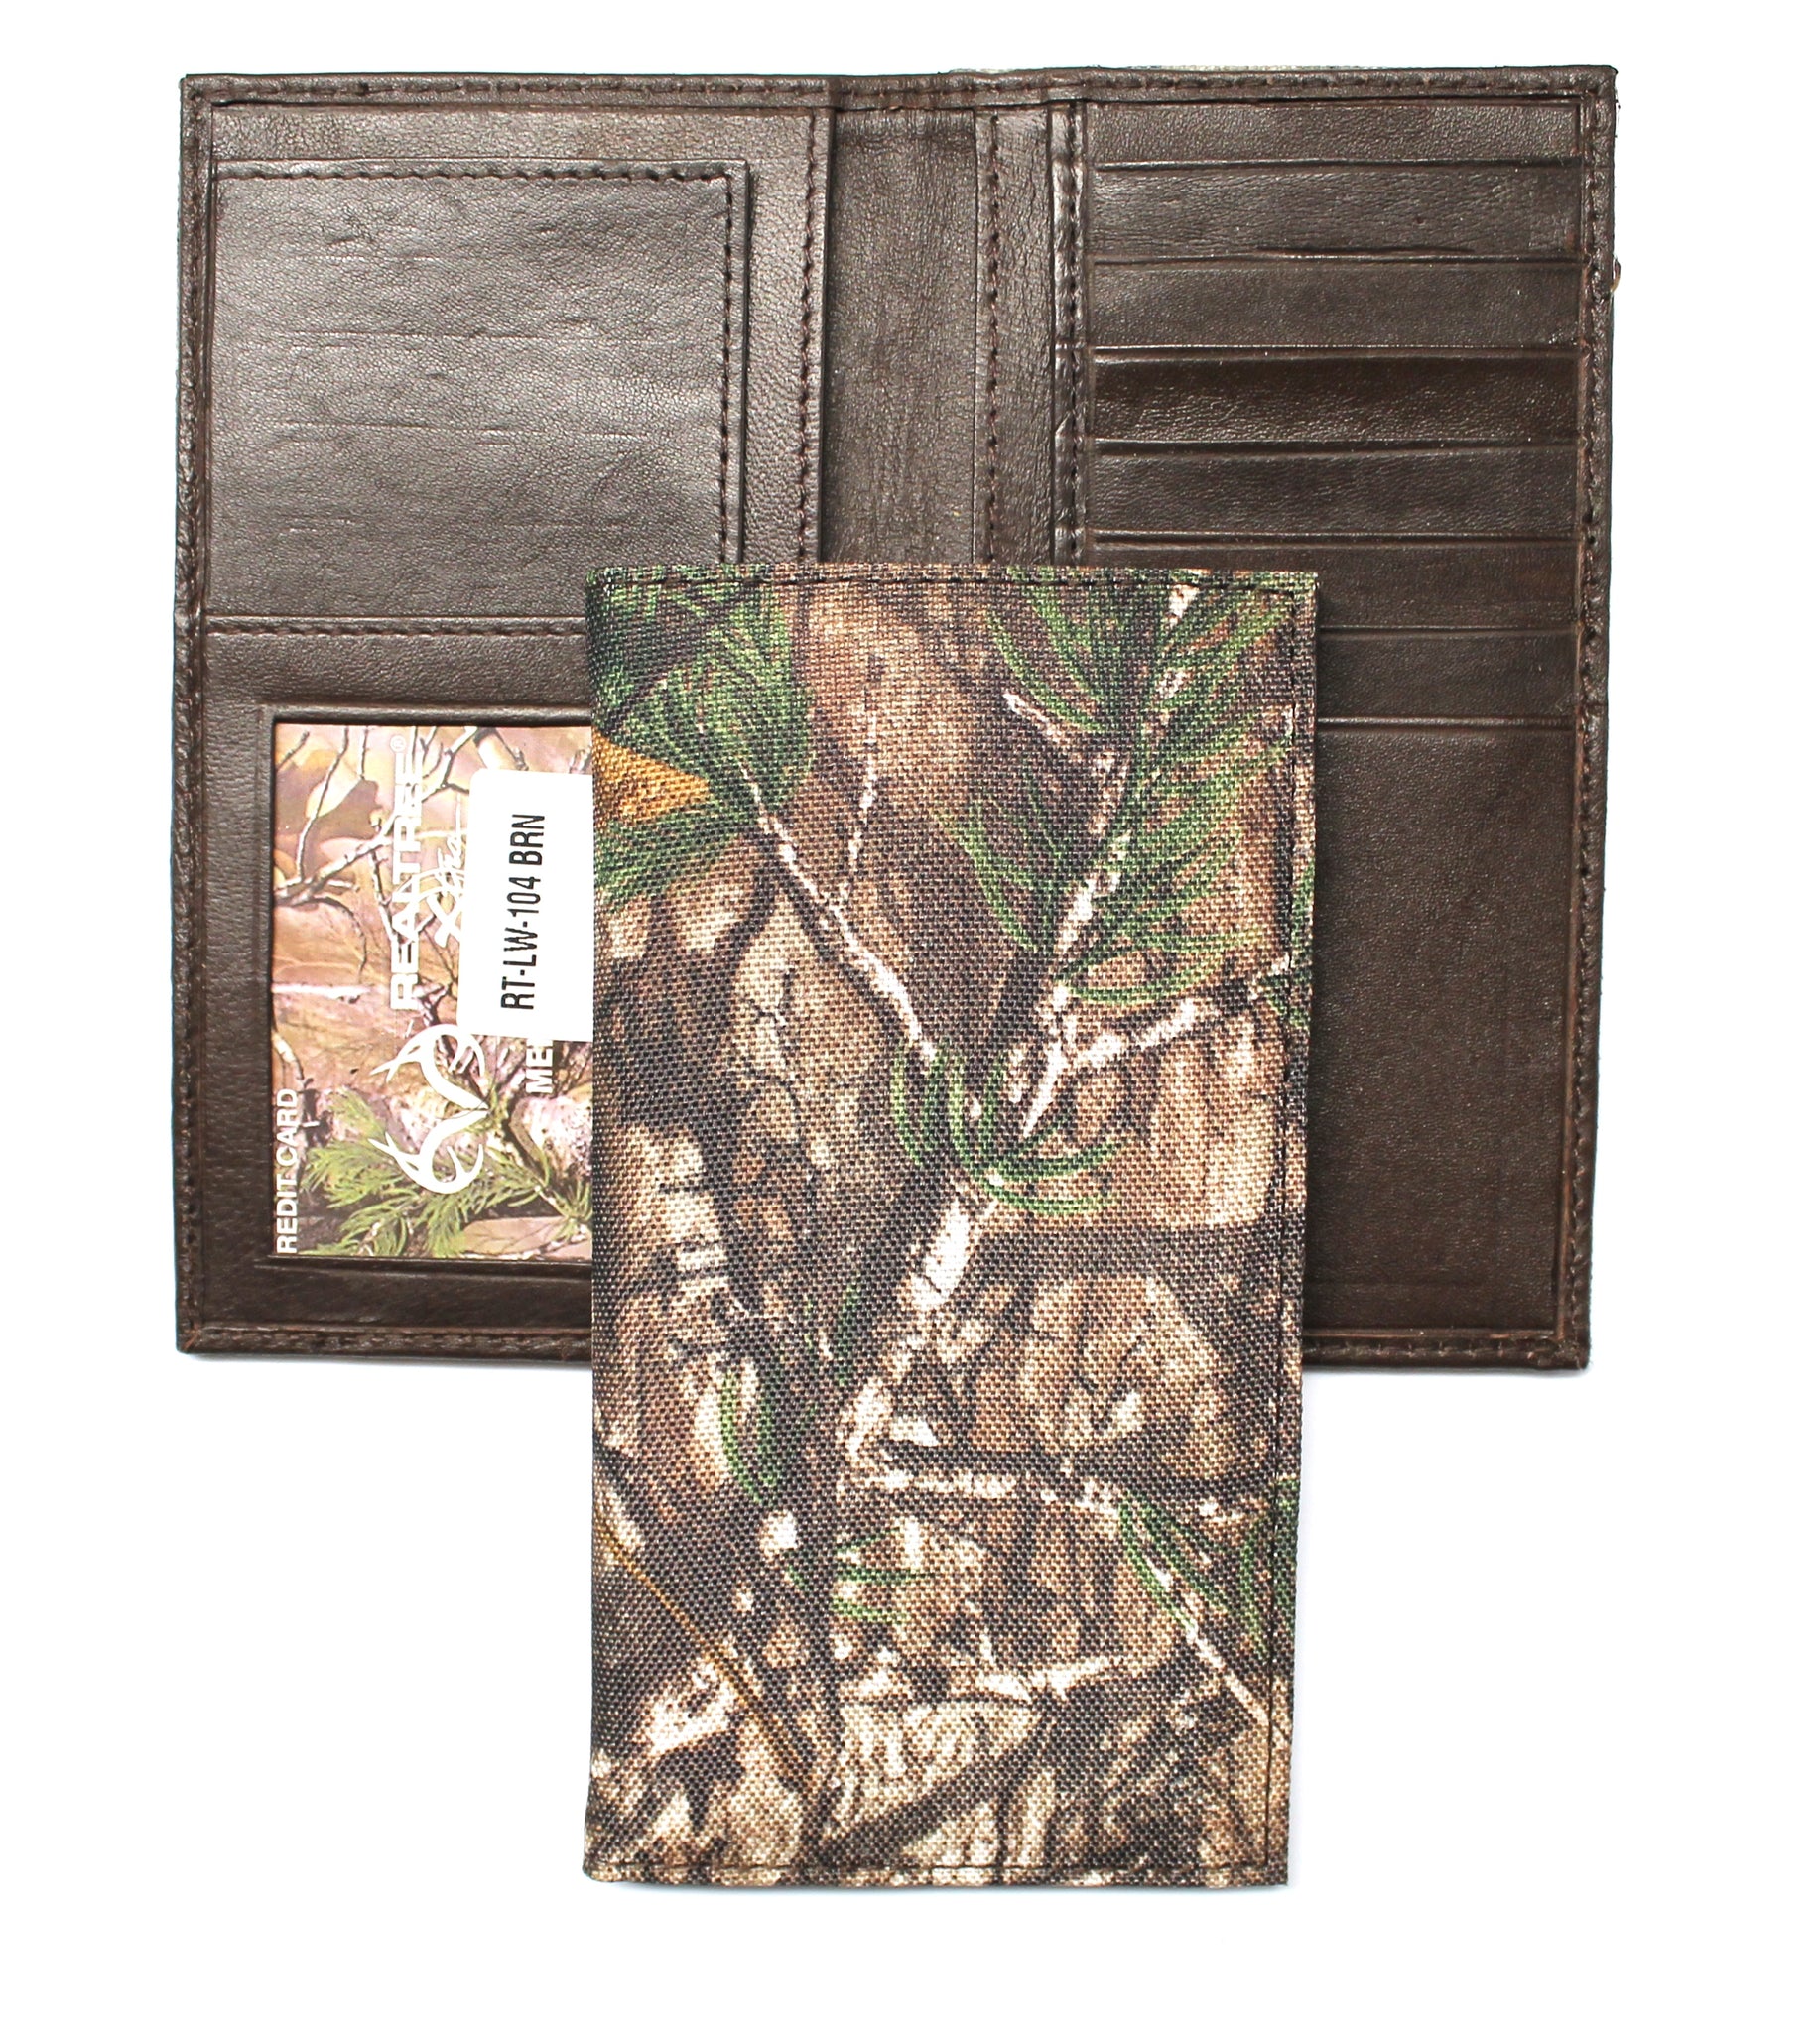 Realtree Camo Roper Wallet - Brown Leather and Nylon Camo – Wallets Plus